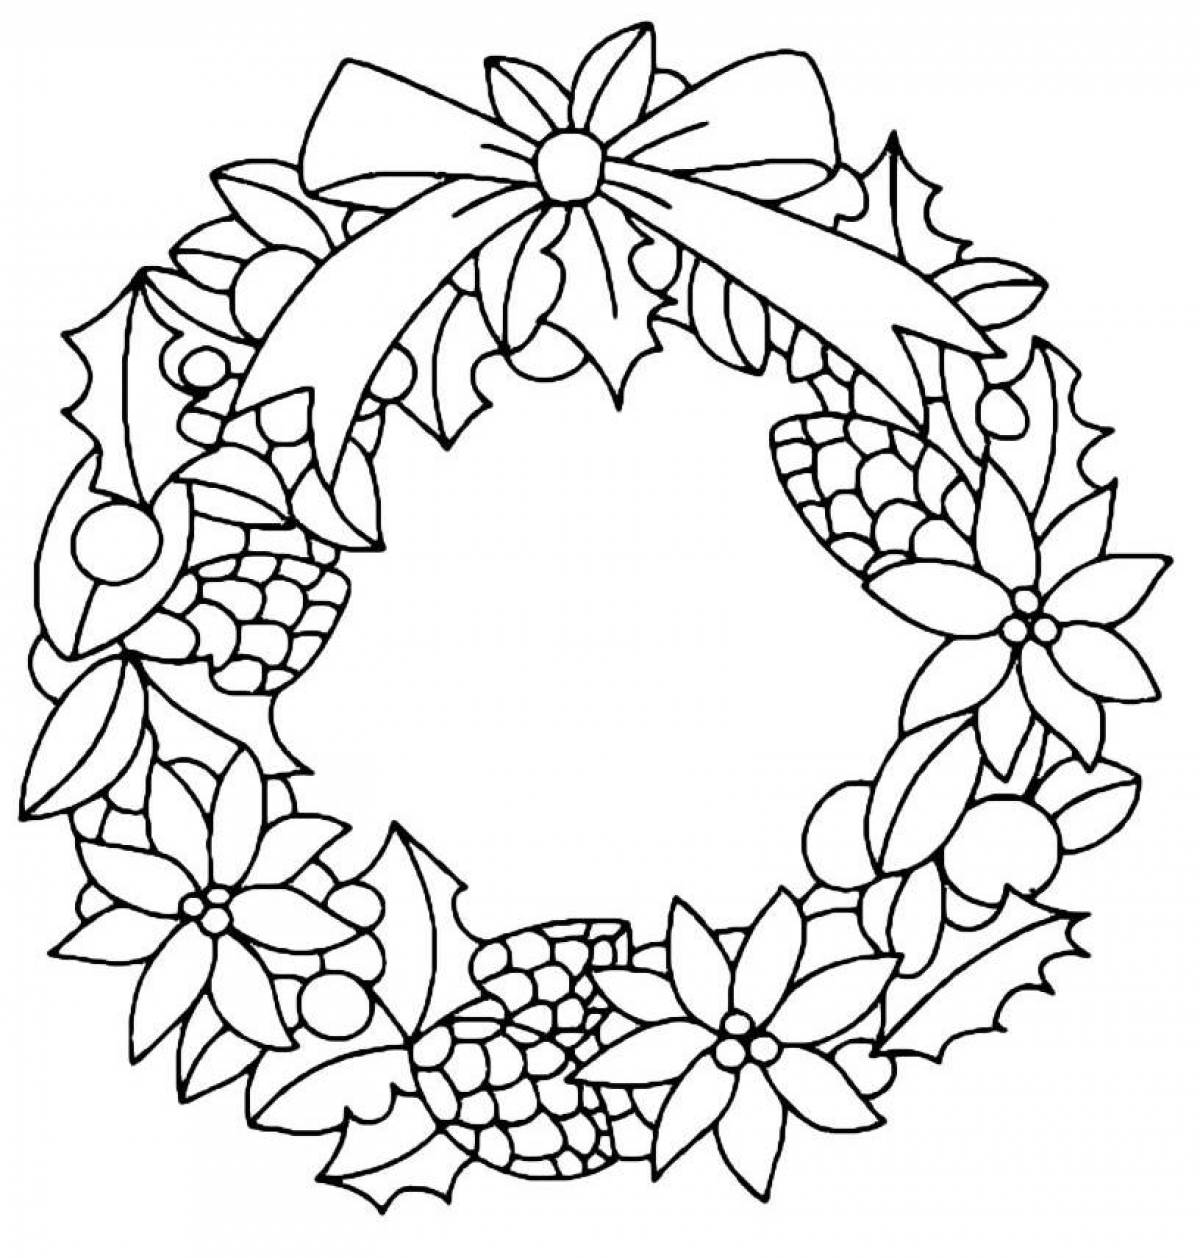 Funny christmas wreath coloring book